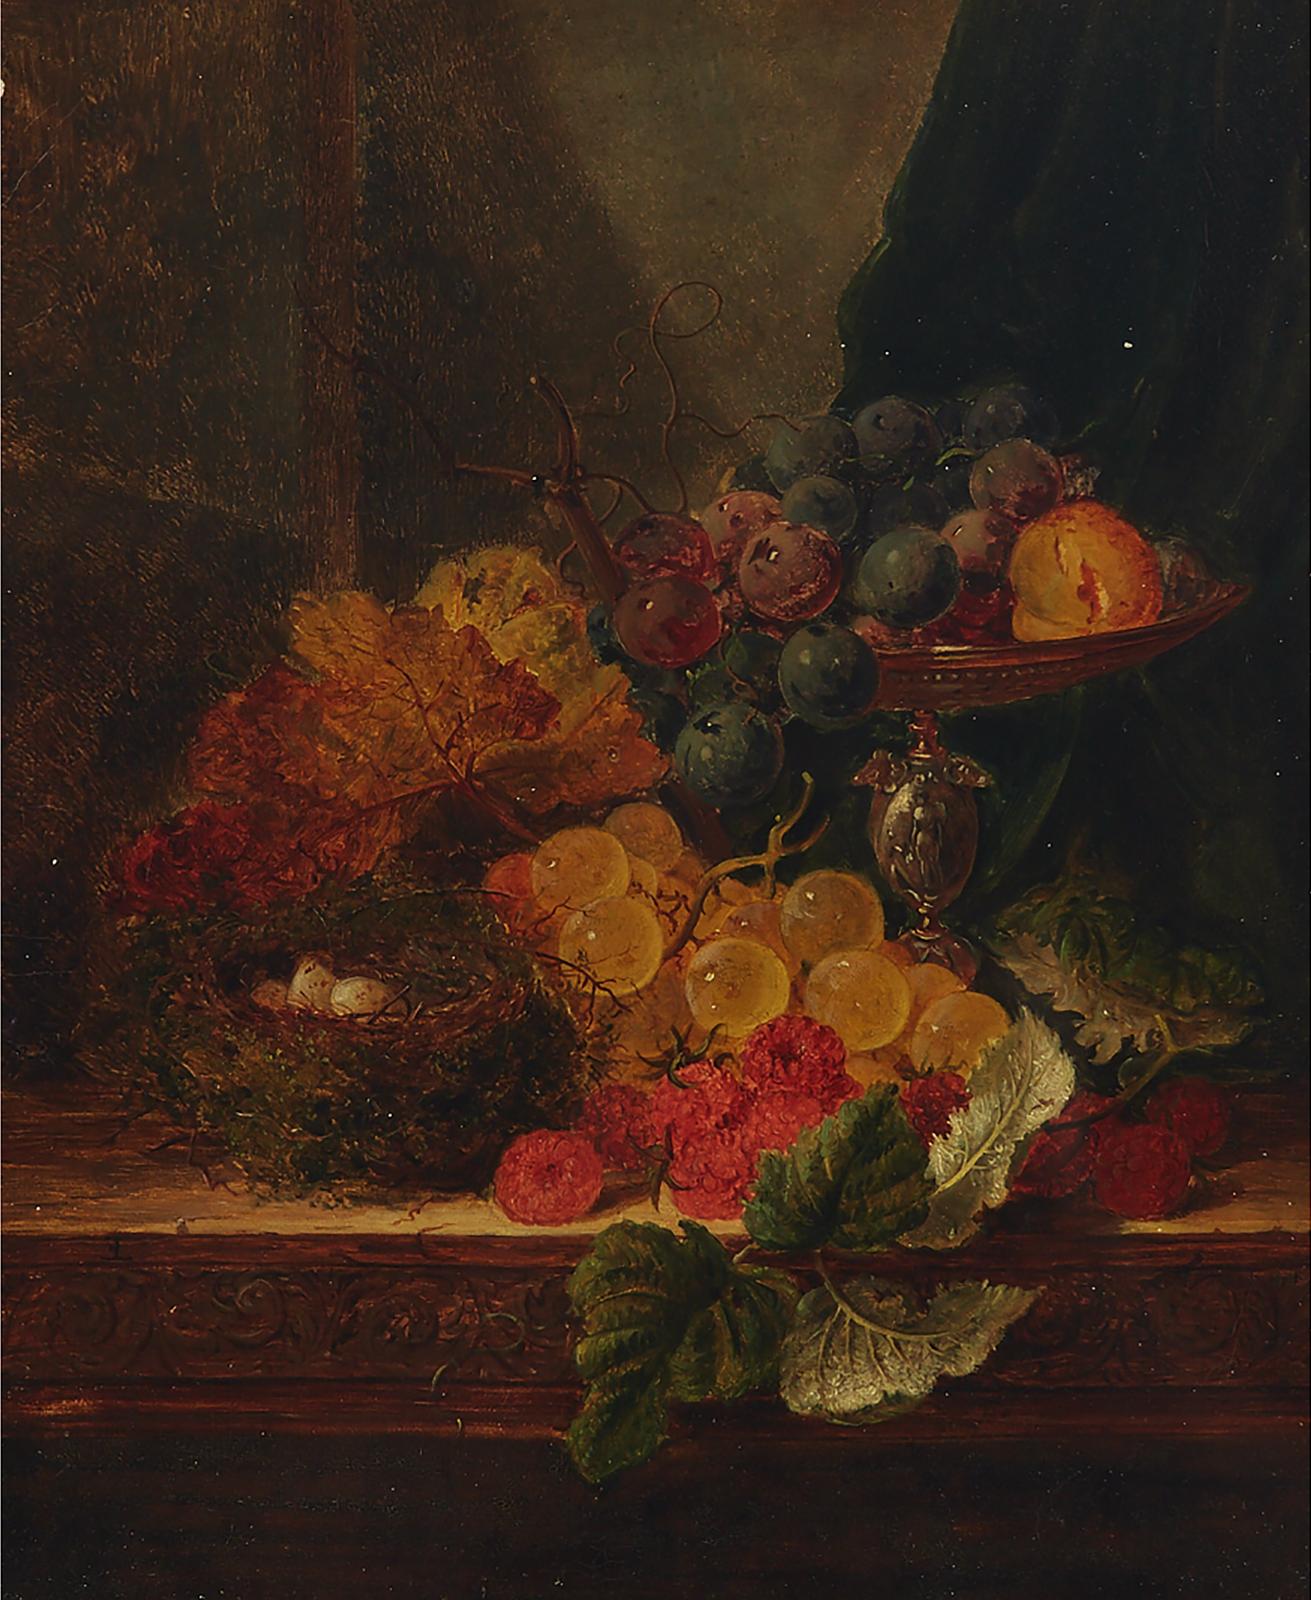 Edward Ladell (1821-1886) - Grapes, Berries And An Egg Nest On A Carved Ledge